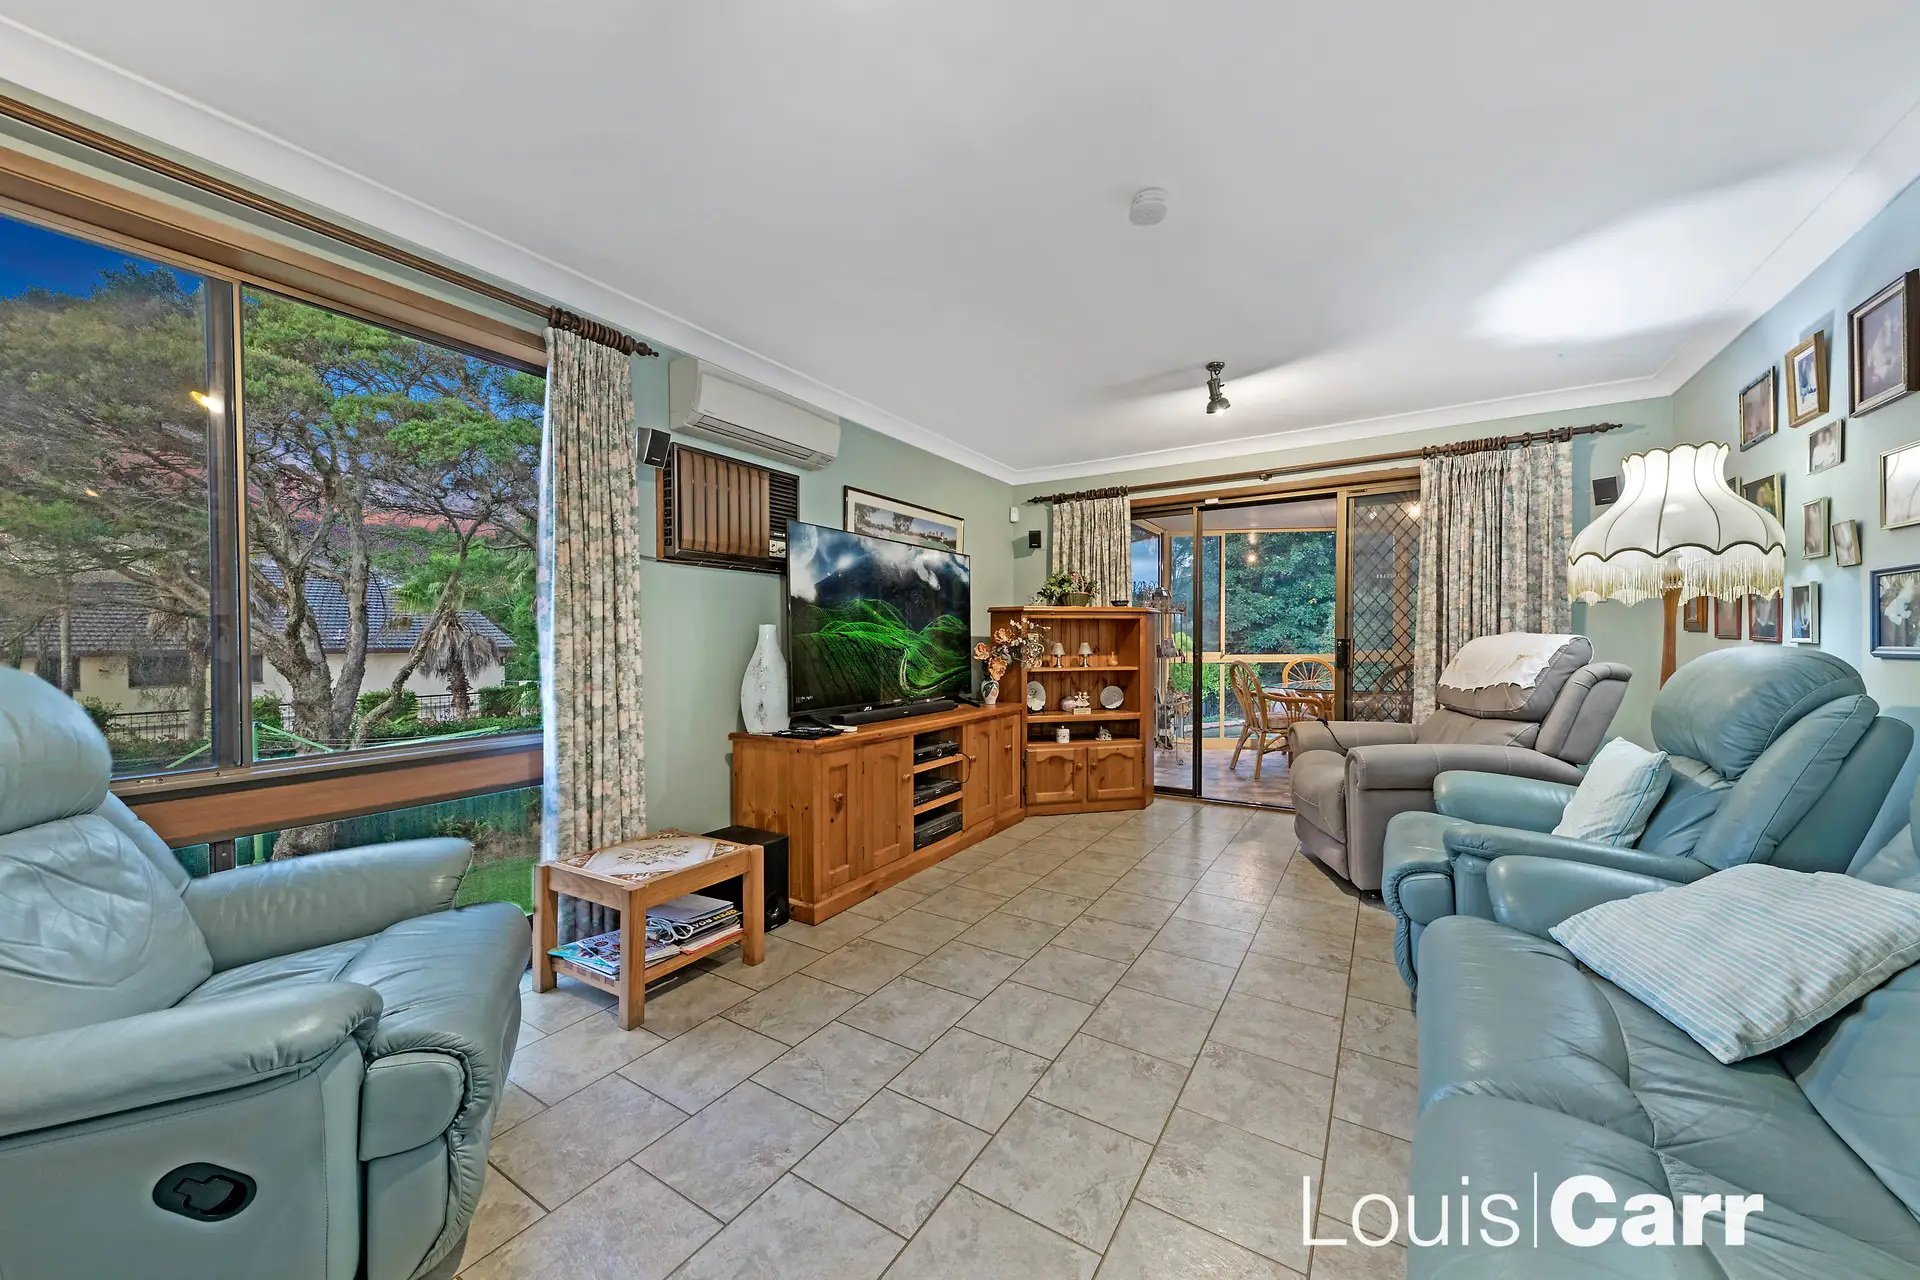 Photo #5: 4 Anne William Drive, West Pennant Hills - Sold by Louis Carr Real Estate